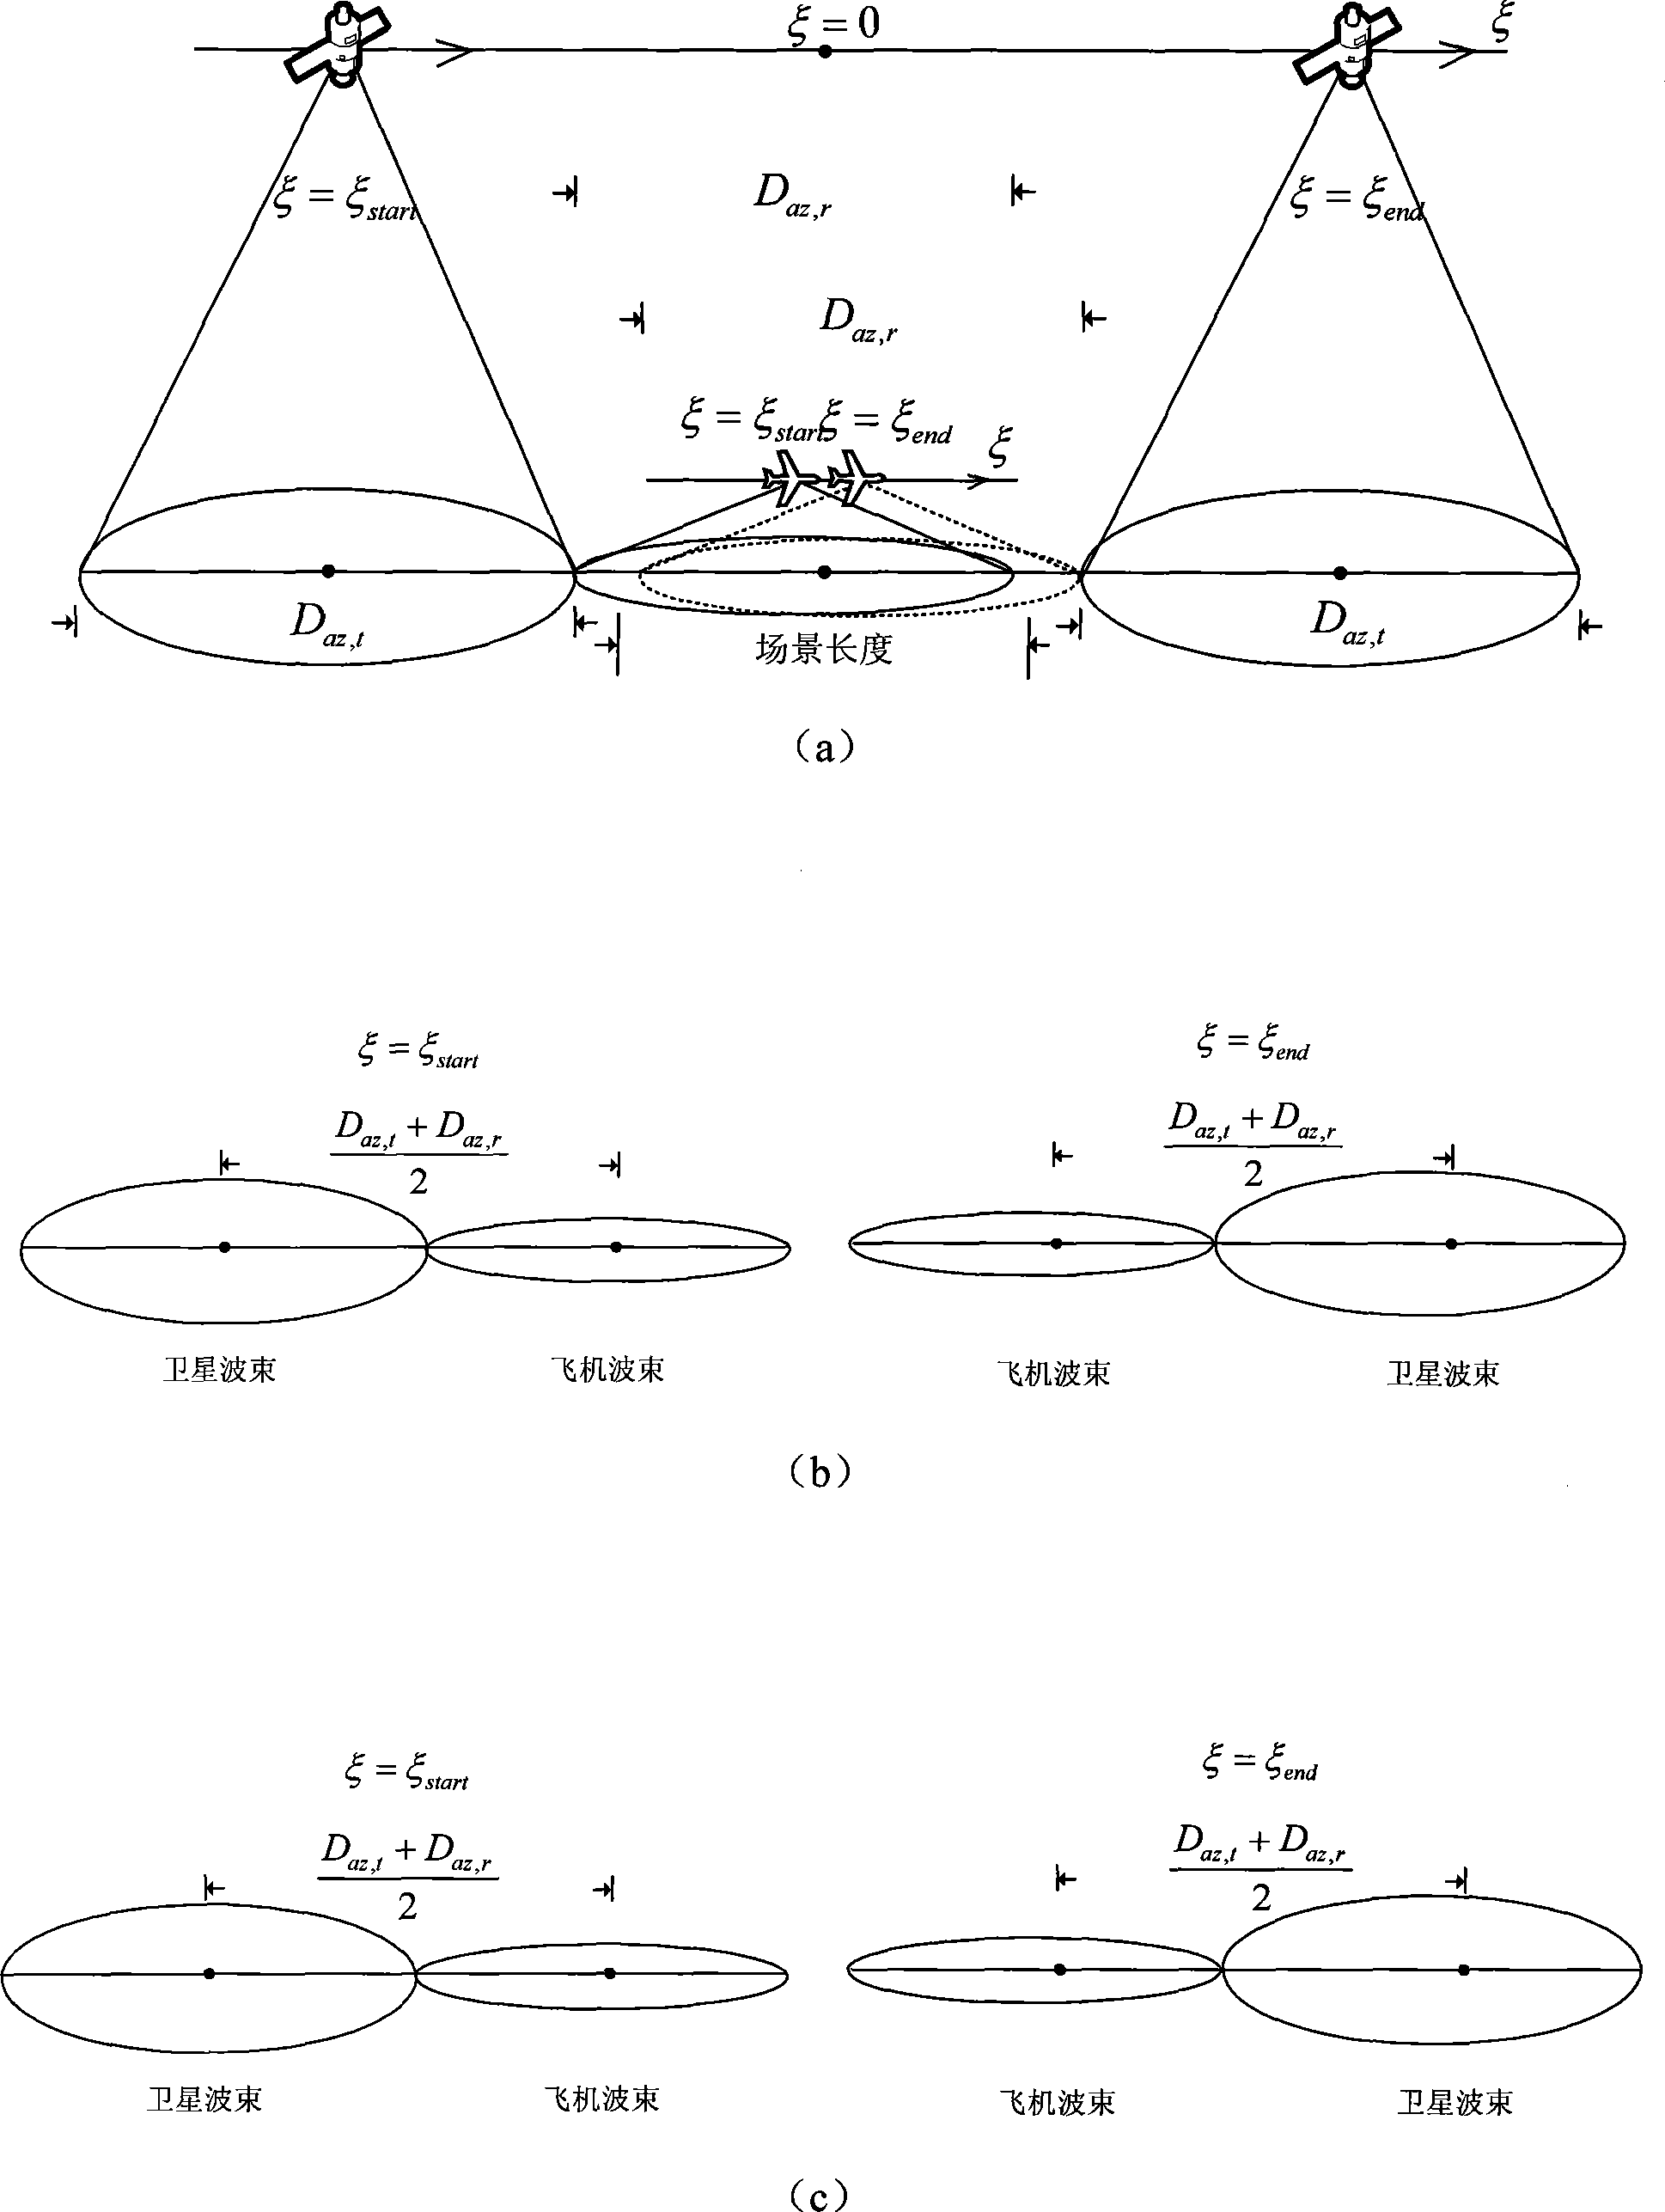 Spacing synchronization process for satellite-machine double-base SAR system